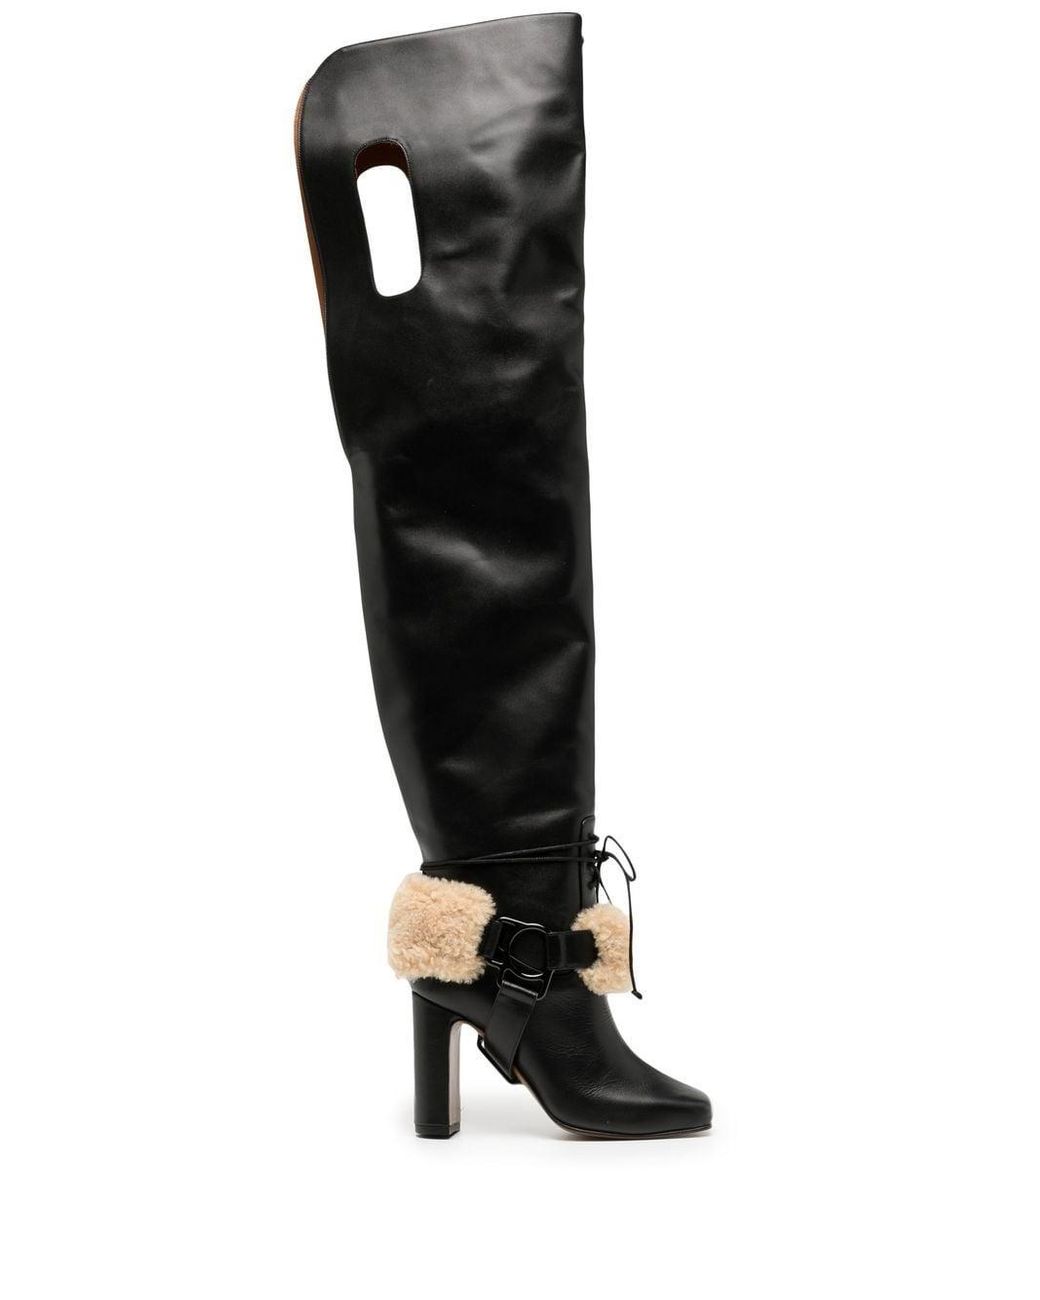 Off-White c/o Virgil Abloh Shearling Ankle Strap Boots in Black | Lyst